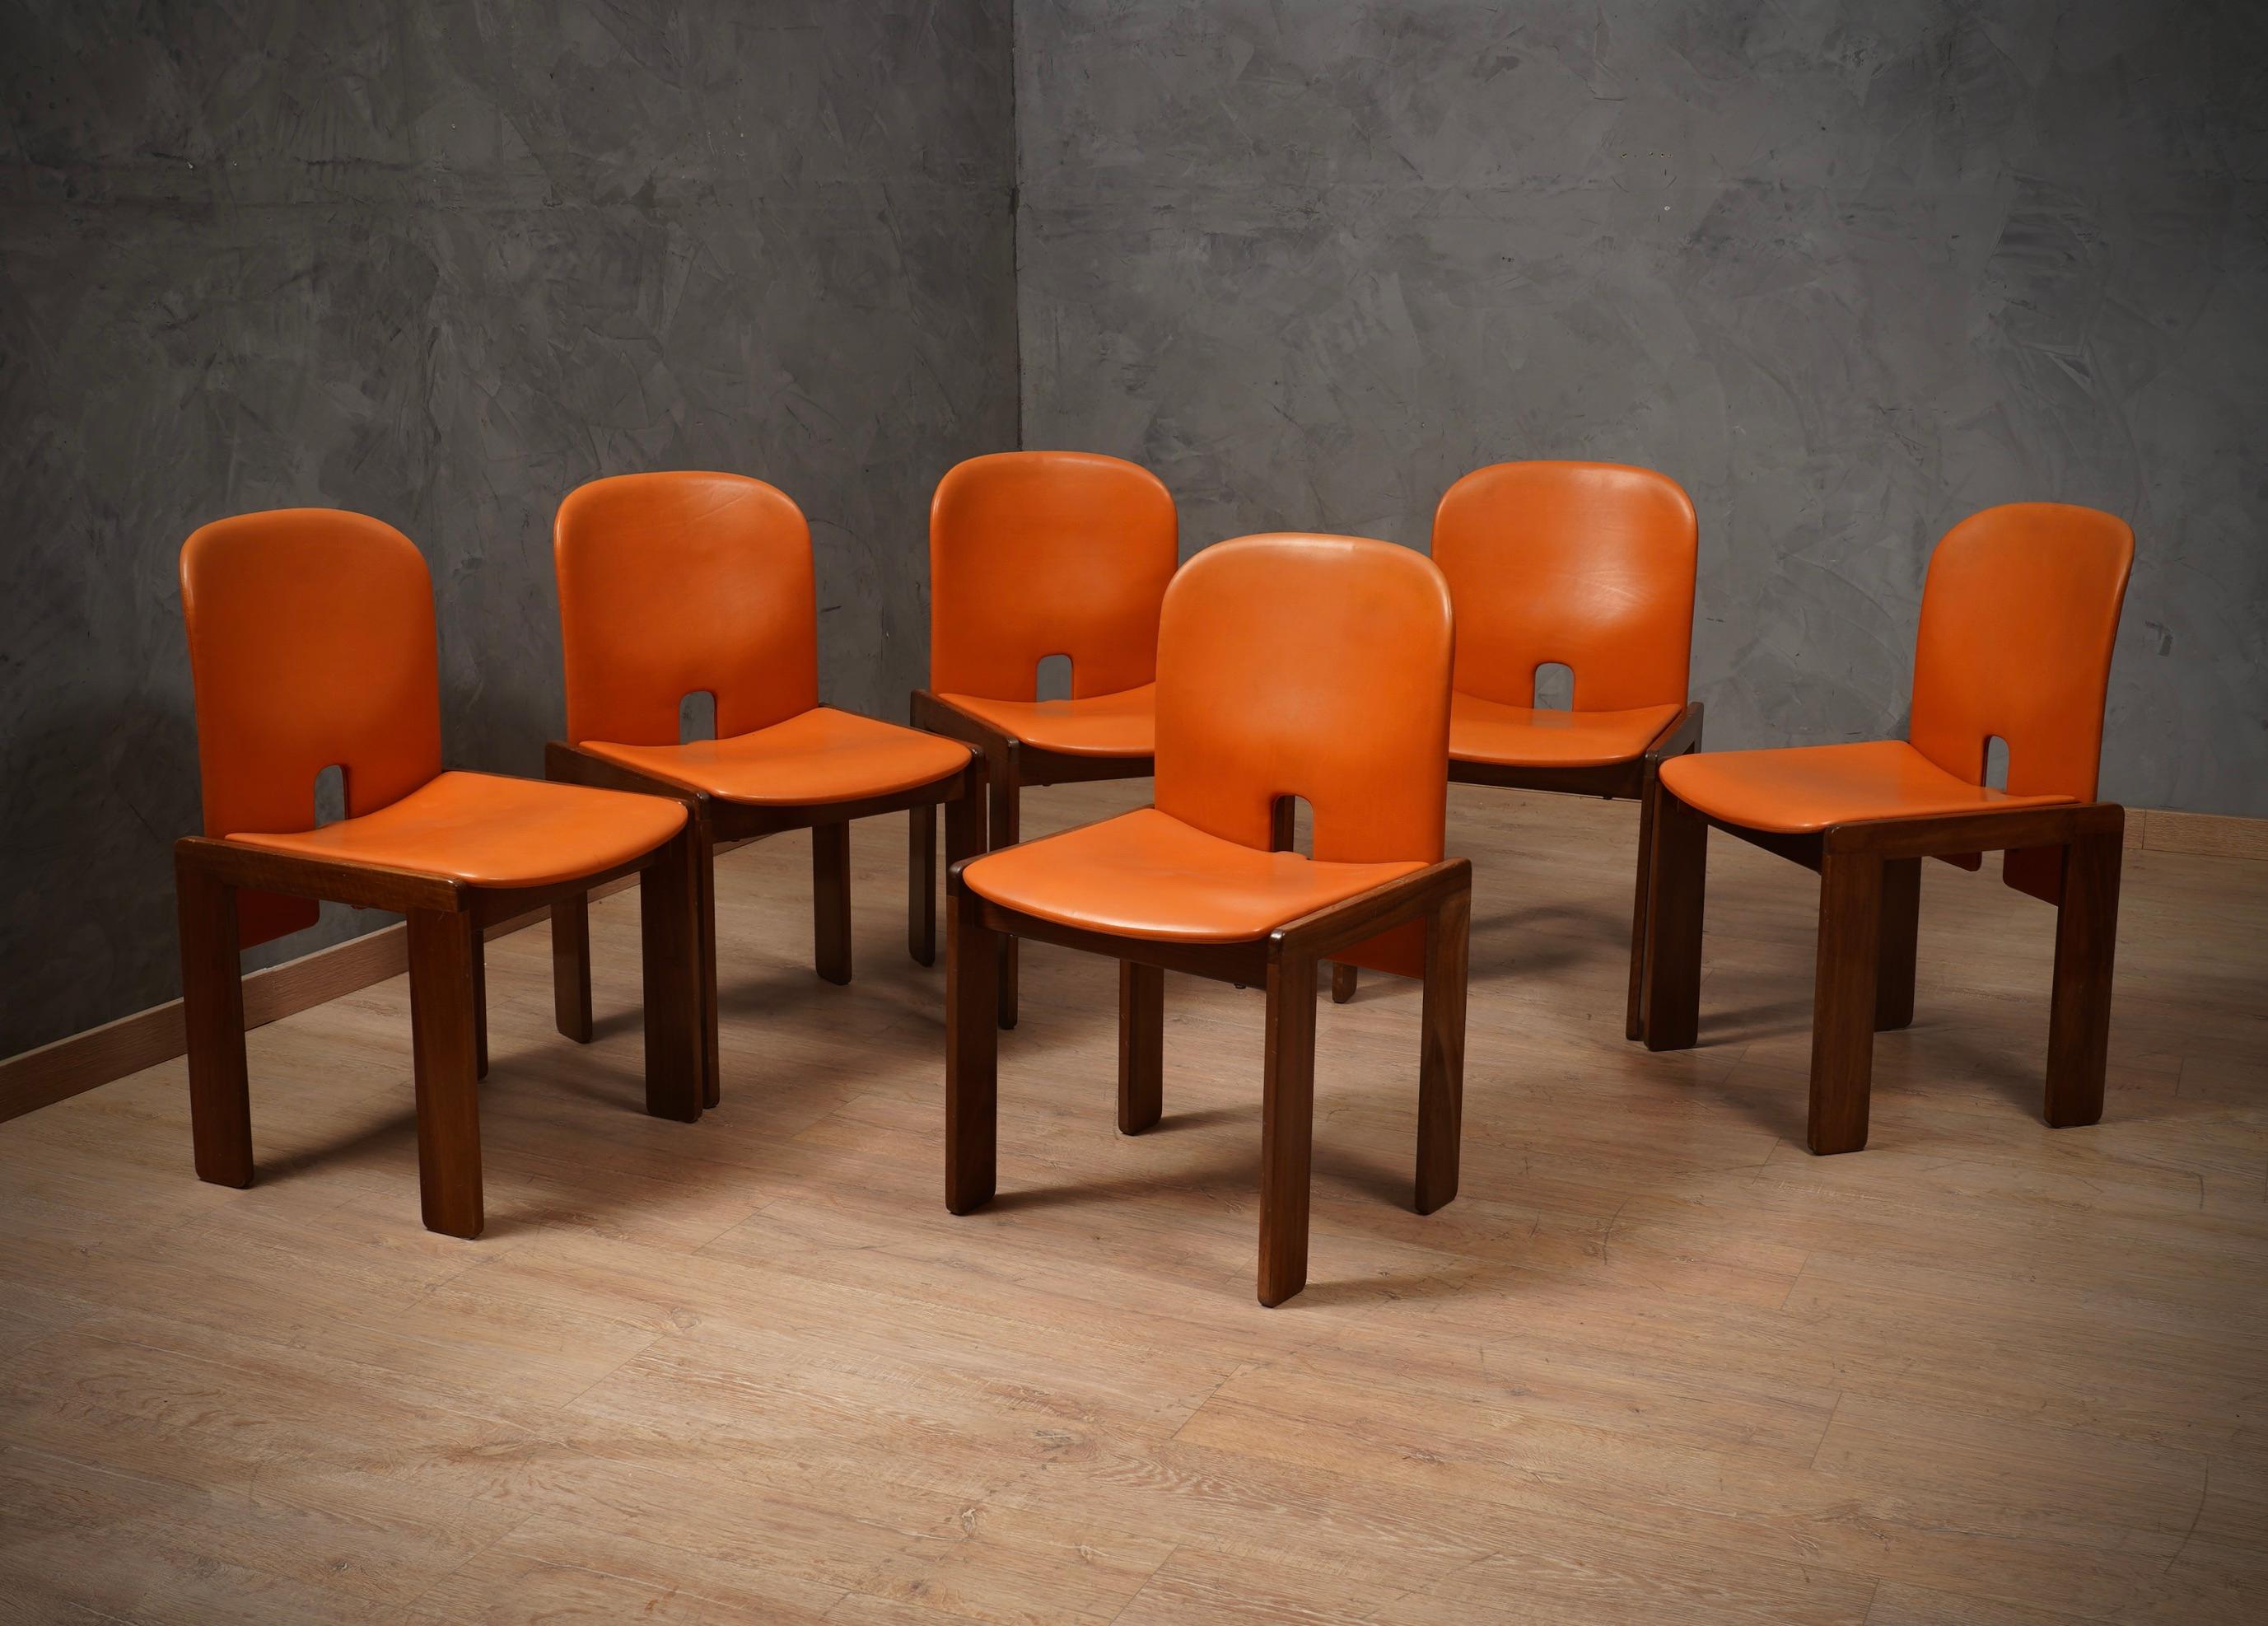 Afra & Tobia Scarpa per Cassina Model 121 Leather Walnut Dinning Chairs, 1967 For Sale 1